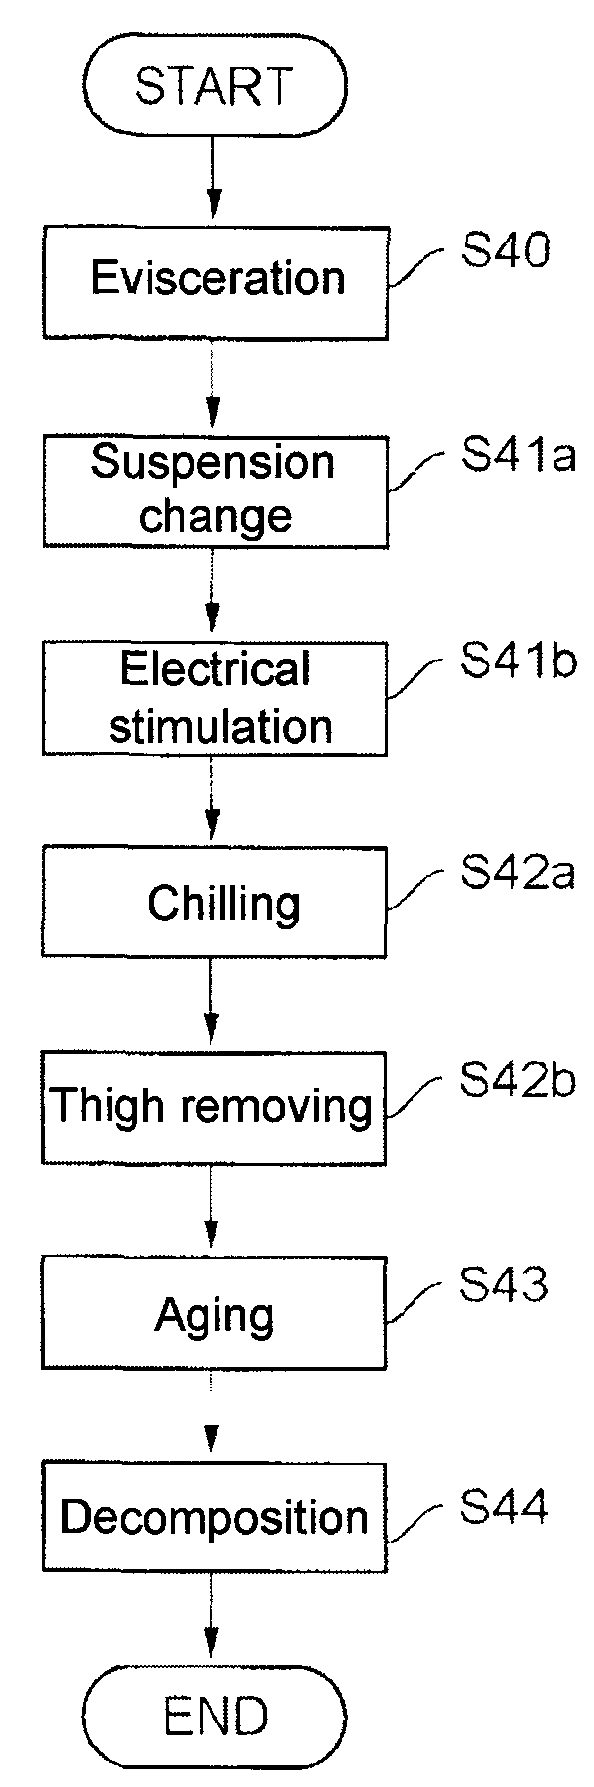 Carcass processing apparatus and method